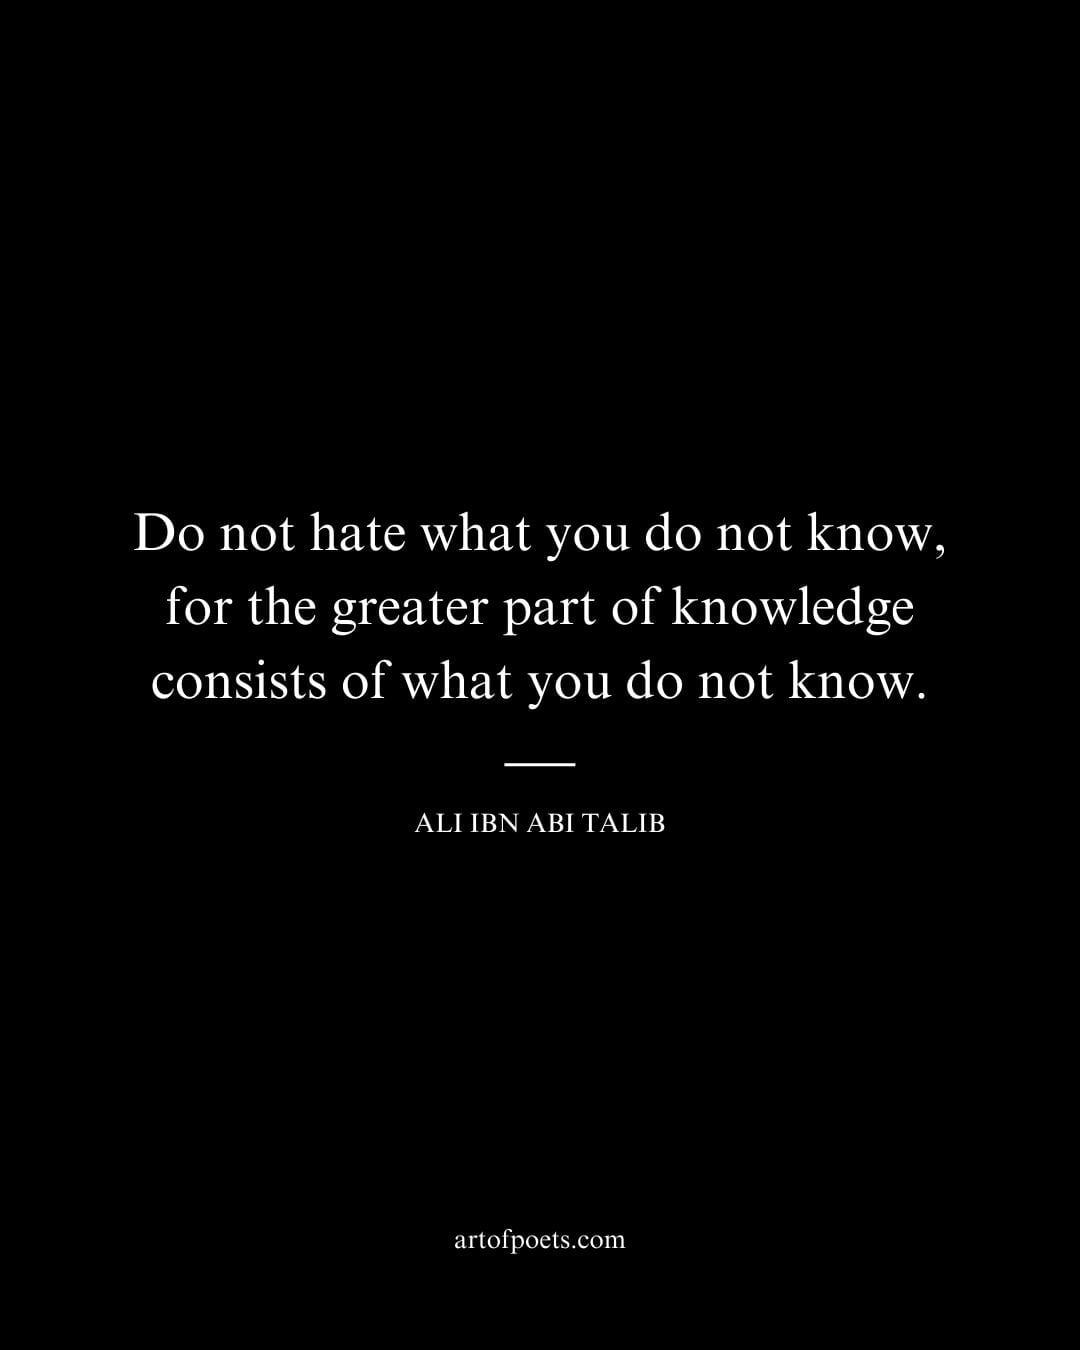 Do not hate what you do not know for the greater part of knowledge consists of what you do not know